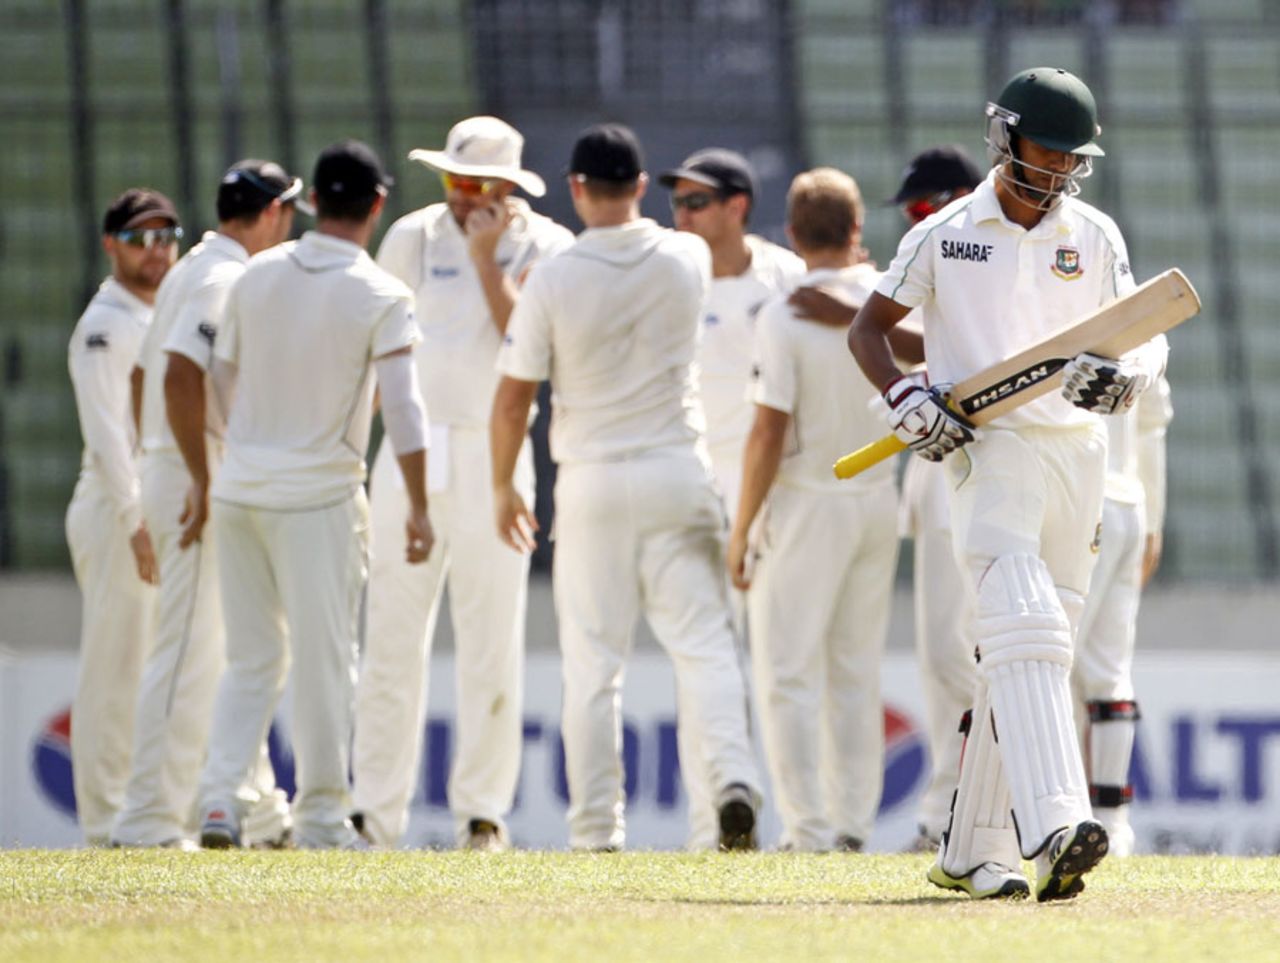 Marshall Ayub walks back after being dismissed, Bangladesh v New Zealand, 2nd Test, 4th day, Mirpur, October 24, 2013